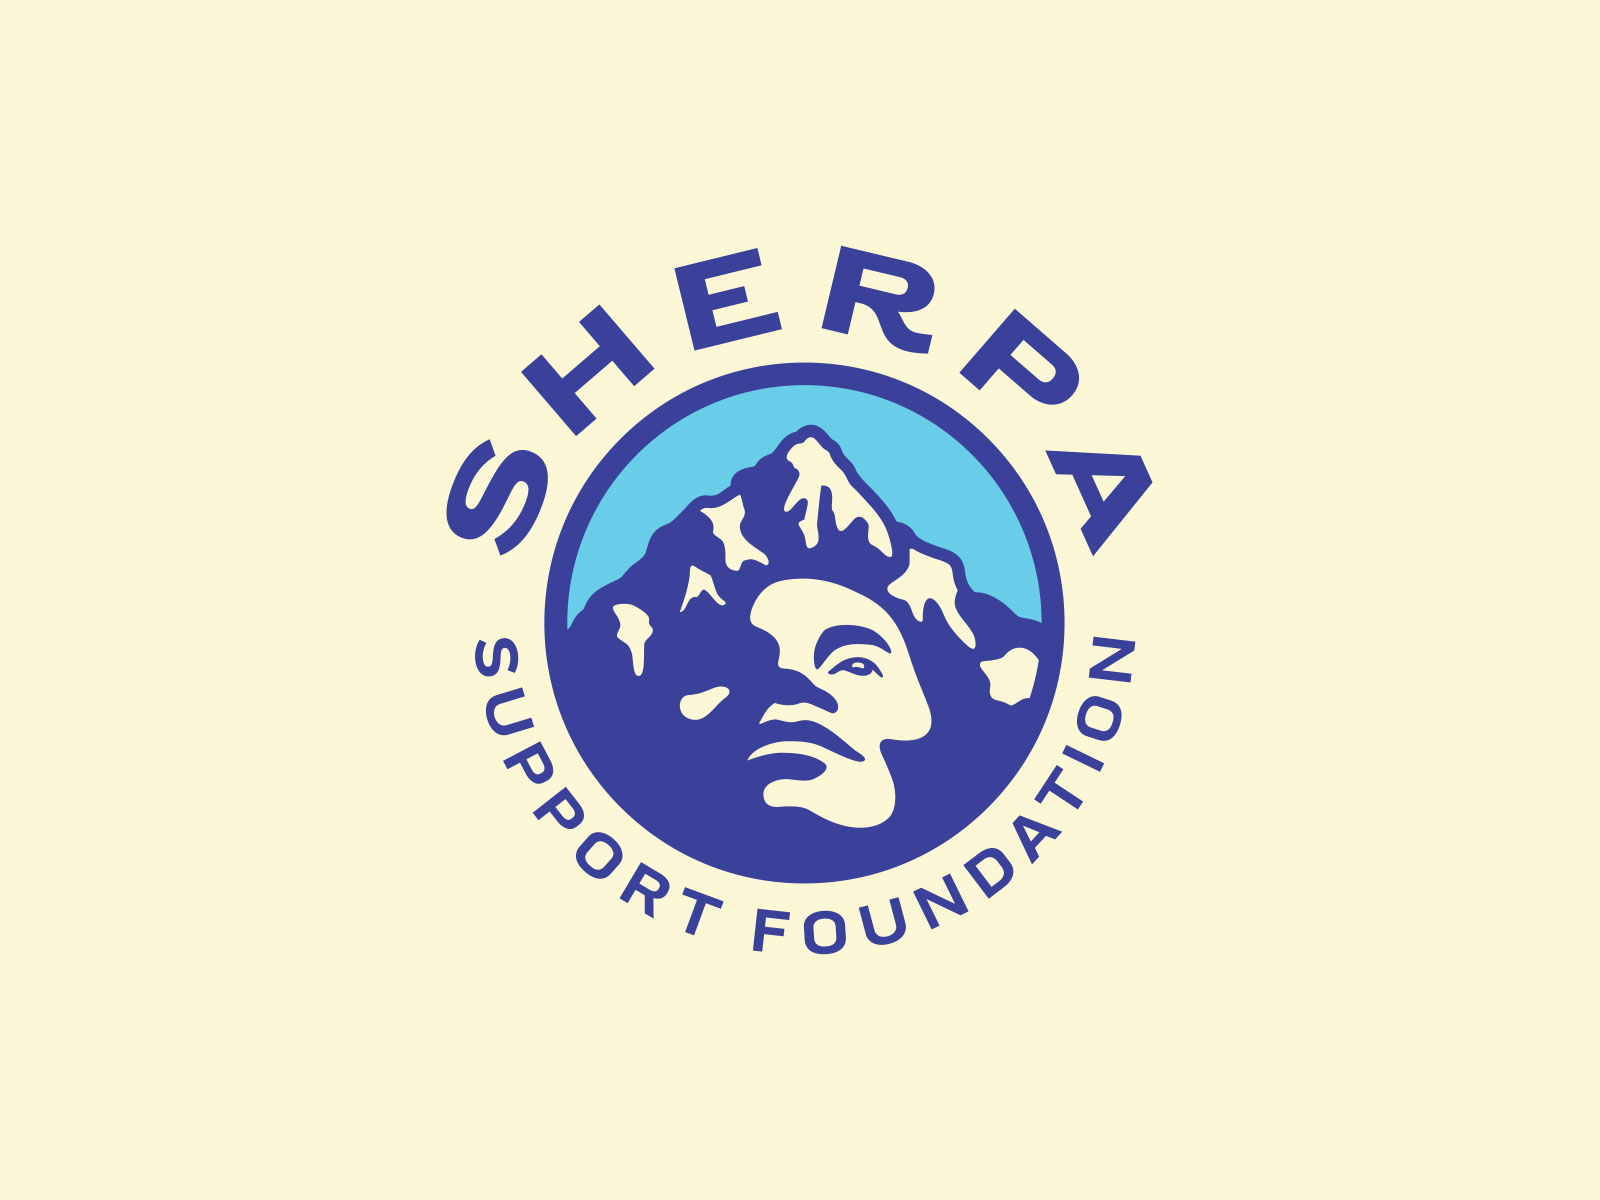 Sherpa Support Foundation Logo By Clint Martin On Dribbble